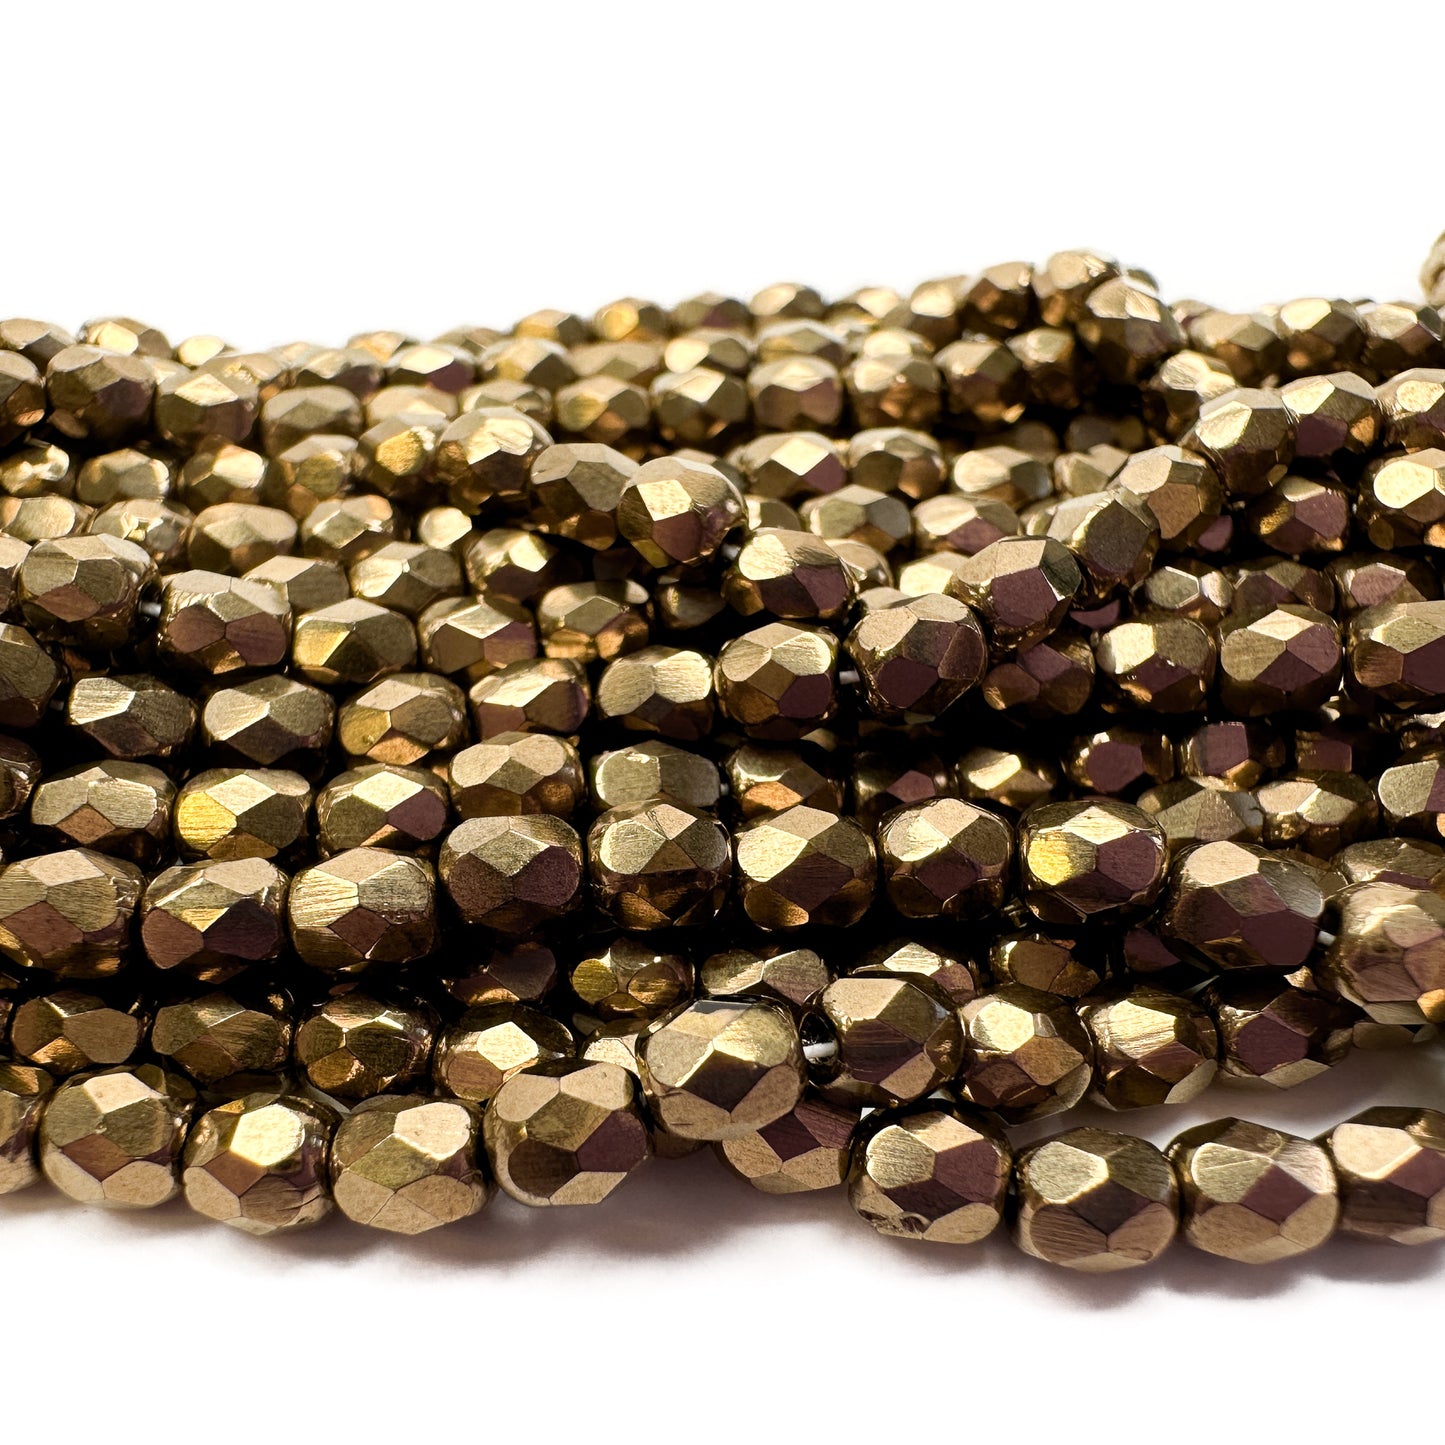 Bronze Opaque 4mm Faceted Glass Bead - 50 pcs.-The Bead Gallery Honolulu